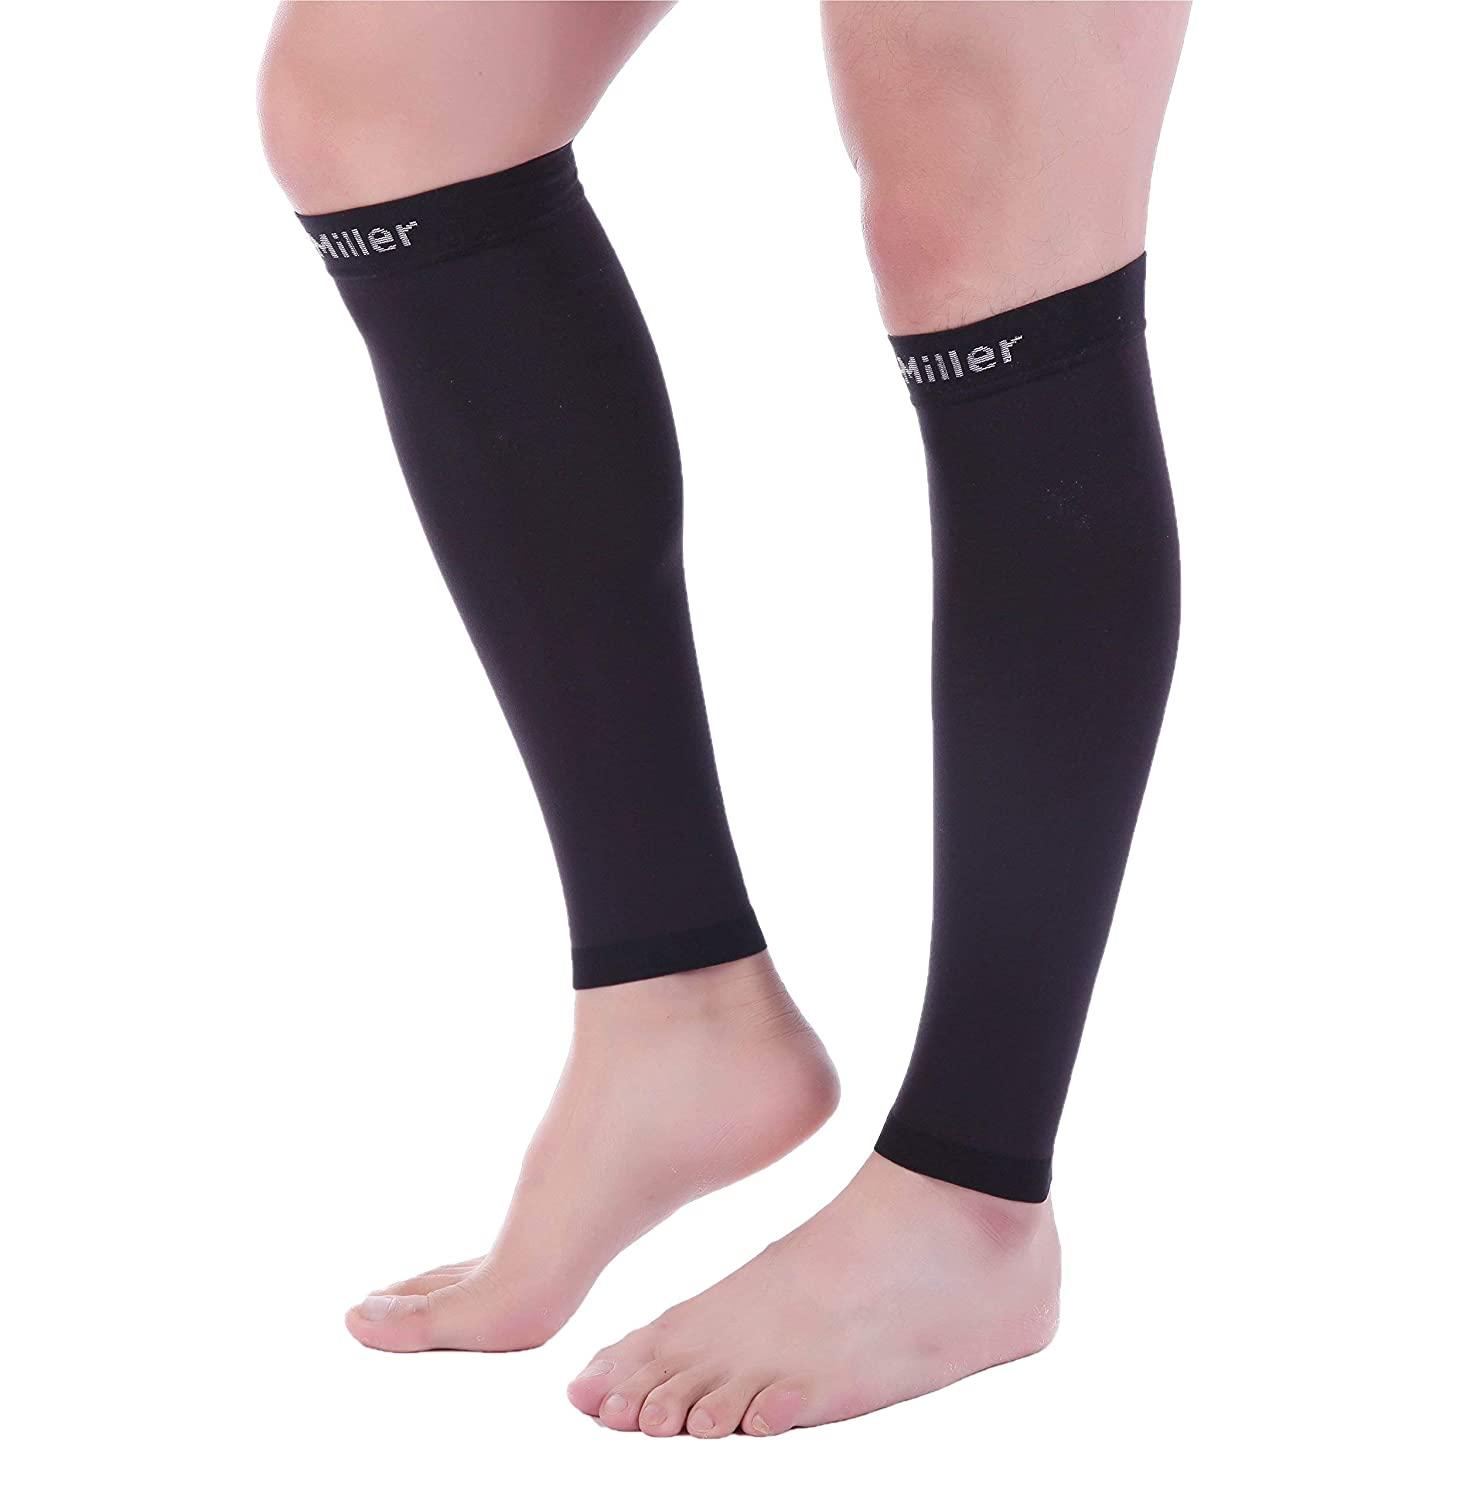  Dr. Scholl's Compression Leg Sleeve with Breathable &  Copper-Infused Fabric for Pain Relief & Support (Sizes S/M) (L/XL) : Health  & Household